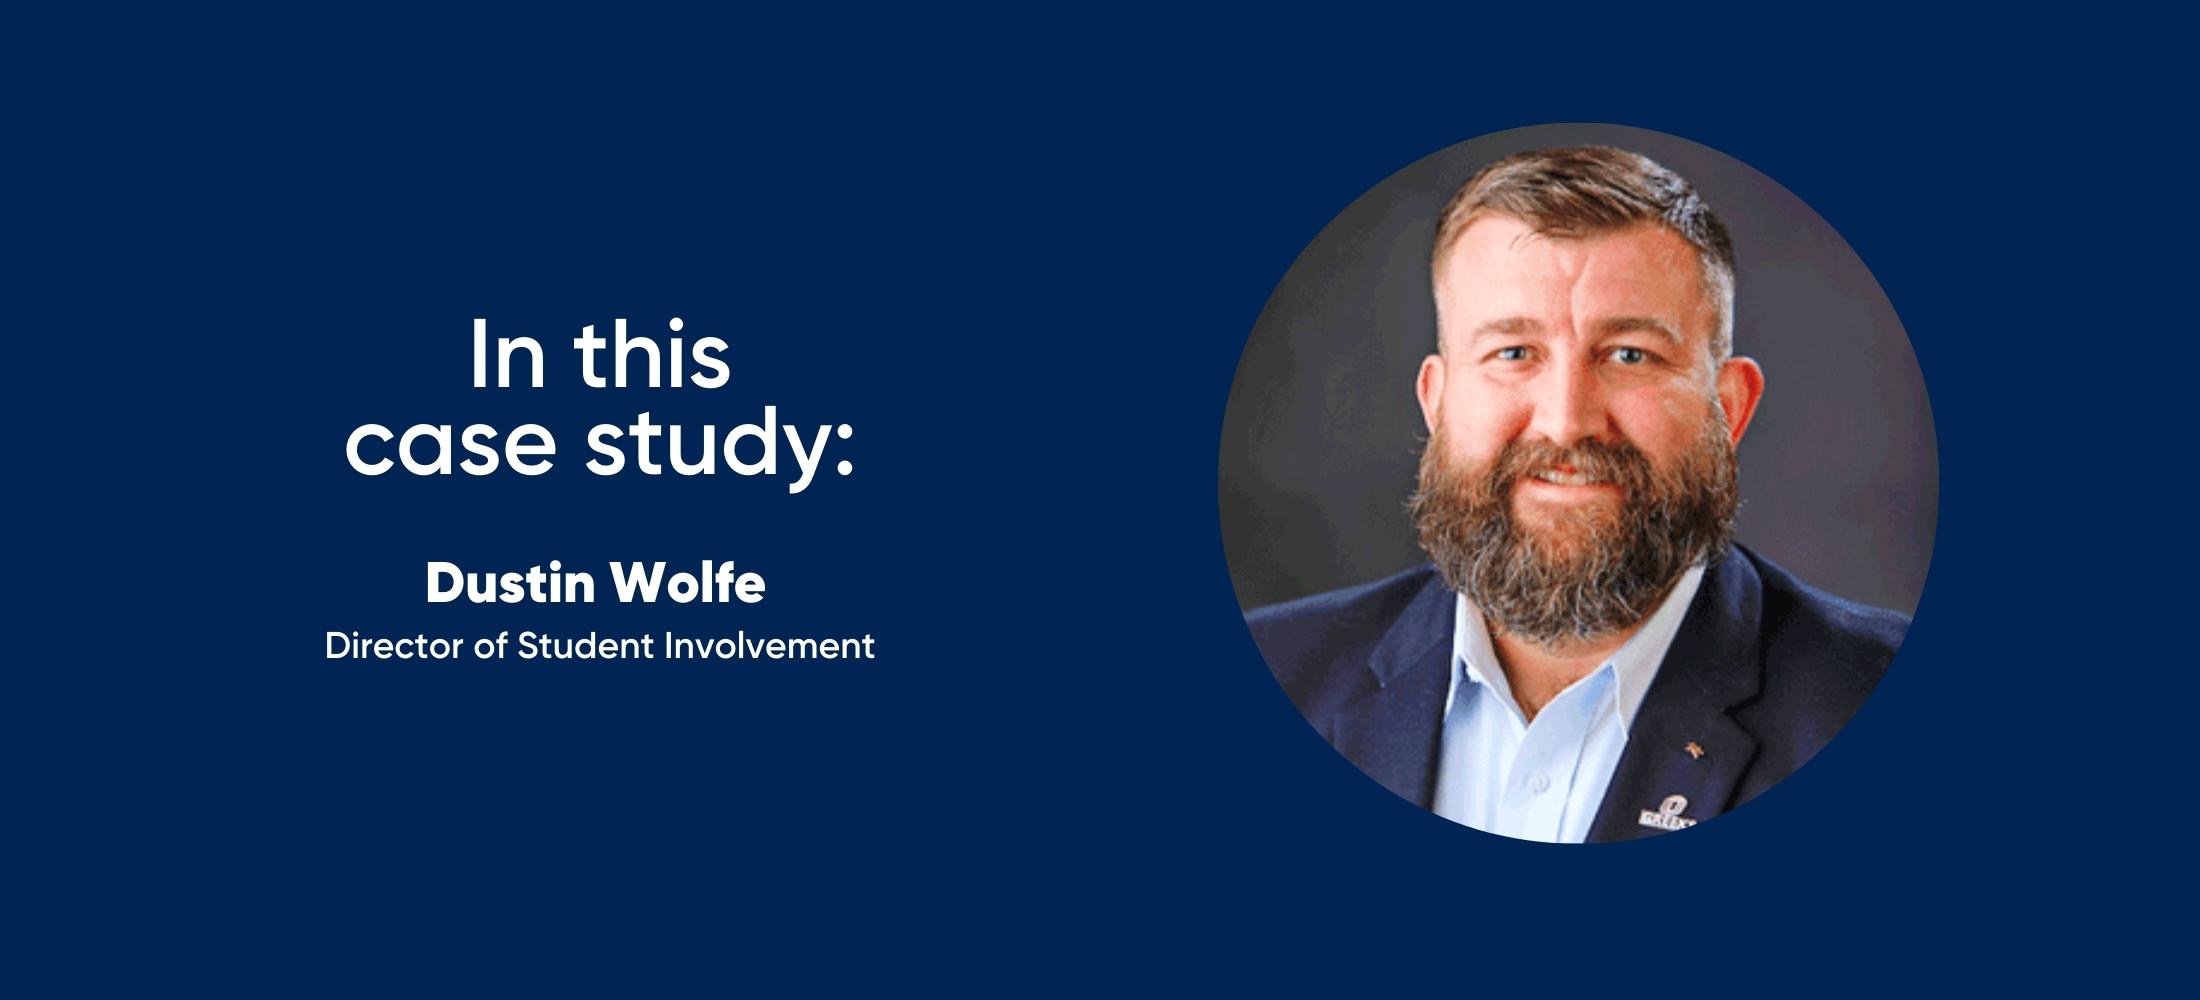 in this case study: Dustin Wolfe, director of student involvement